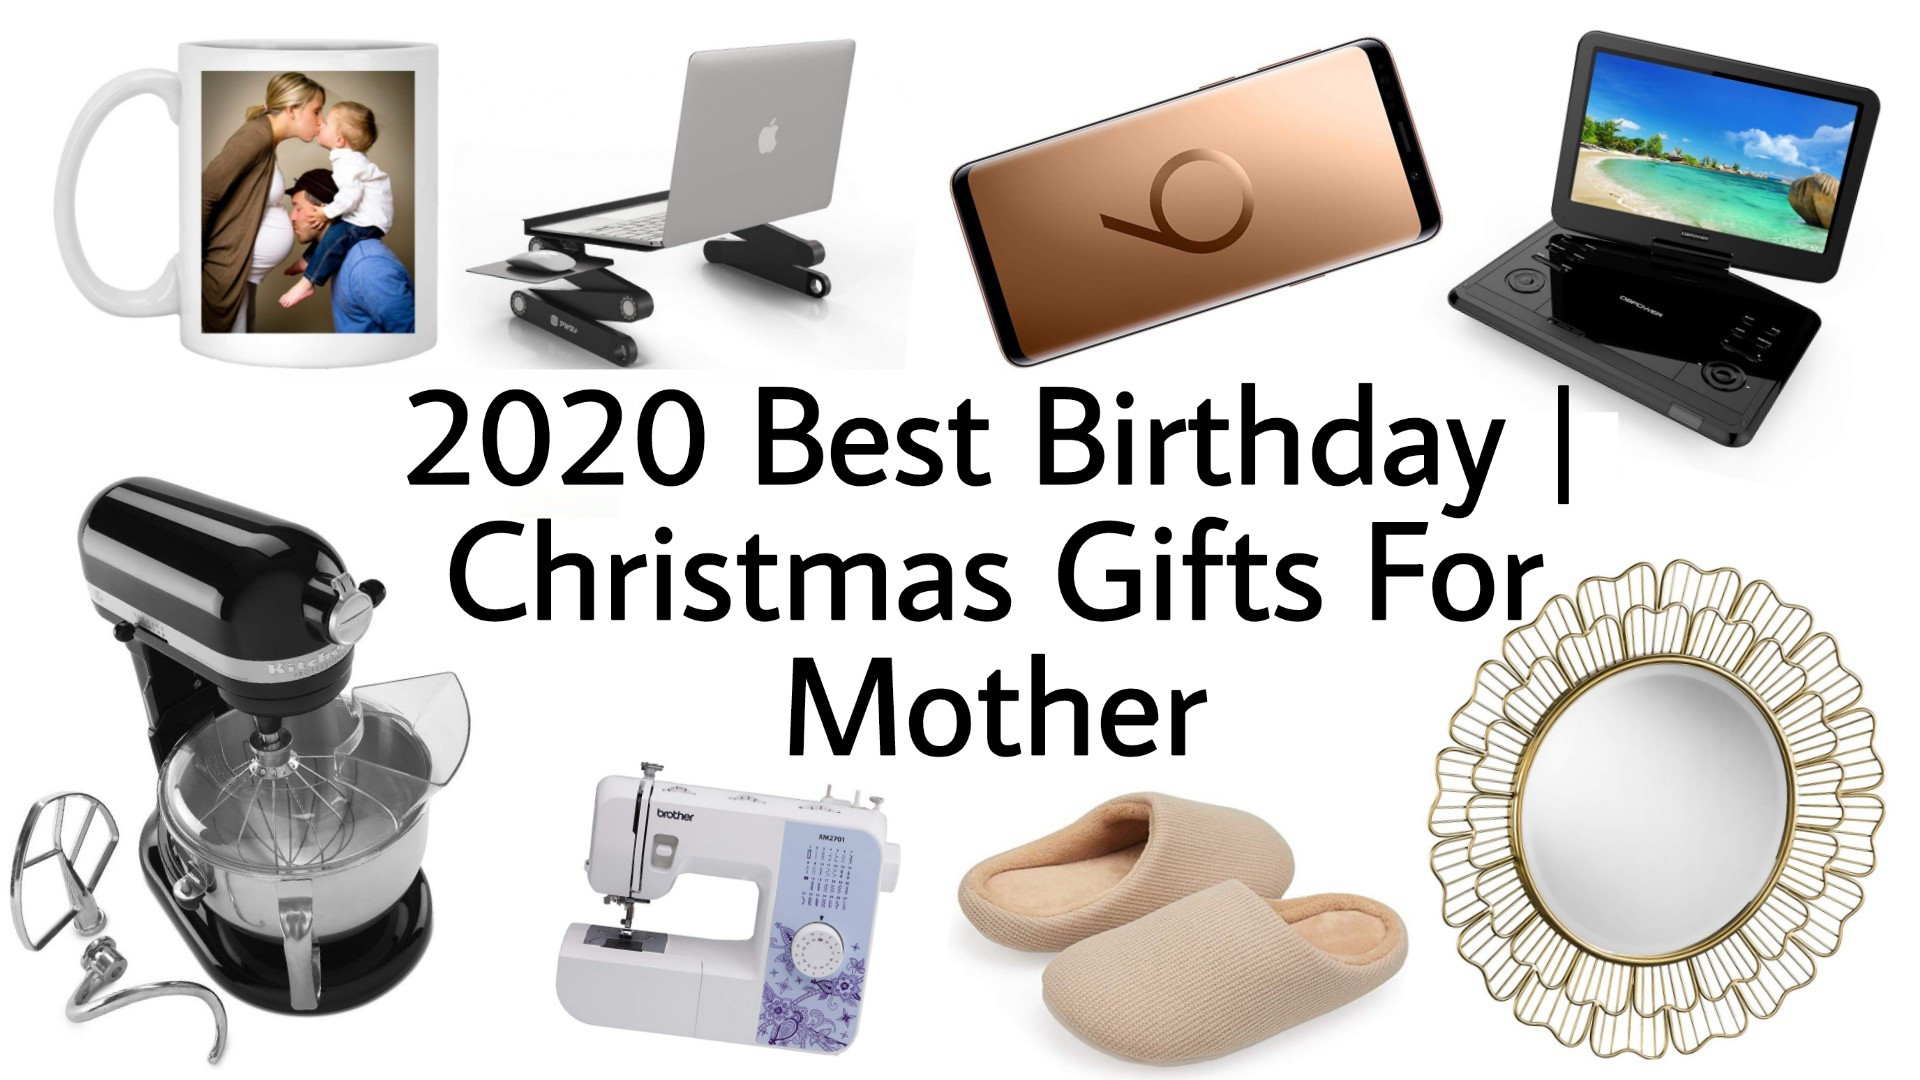 Christmas Gift Ideas 2020 For Her
 2020 Best Christmas Gifts for Mom